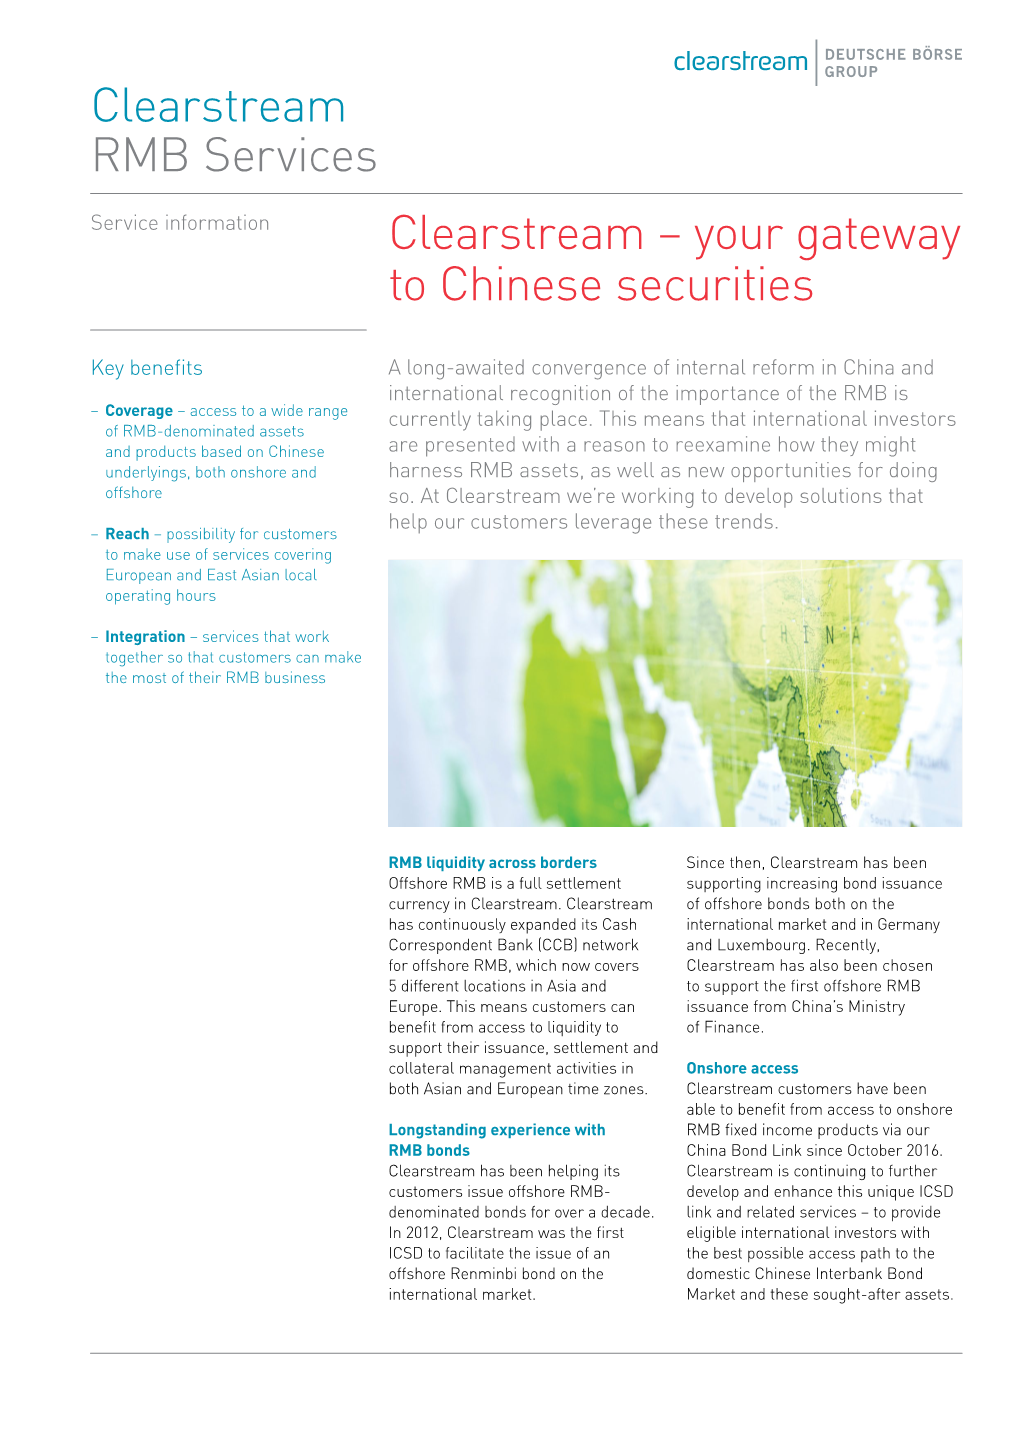 Clearstream RMB Services Clearstream – Your Gateway To